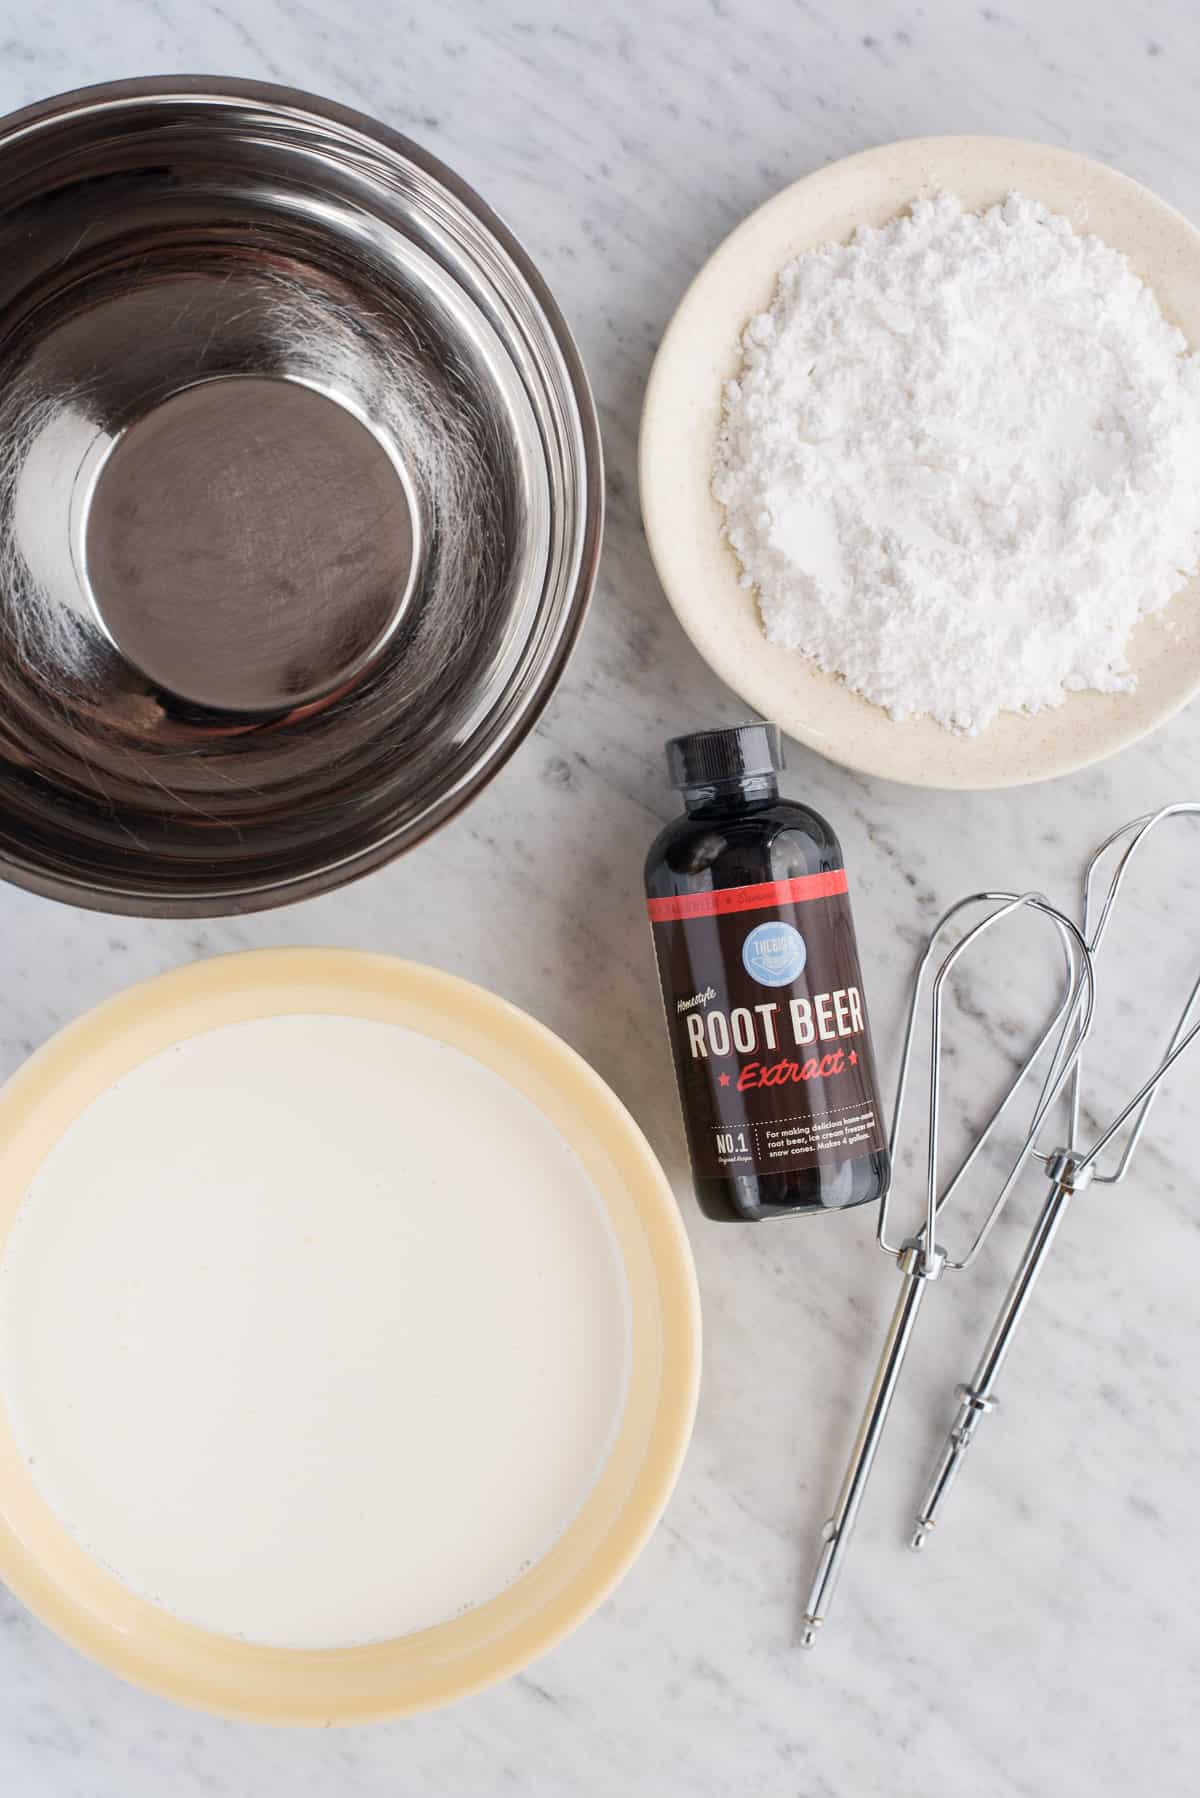 ingredients to make root beer frosting, includes metal bowl, powdered sugar, heavy cream, root beer extract and mixing beaters